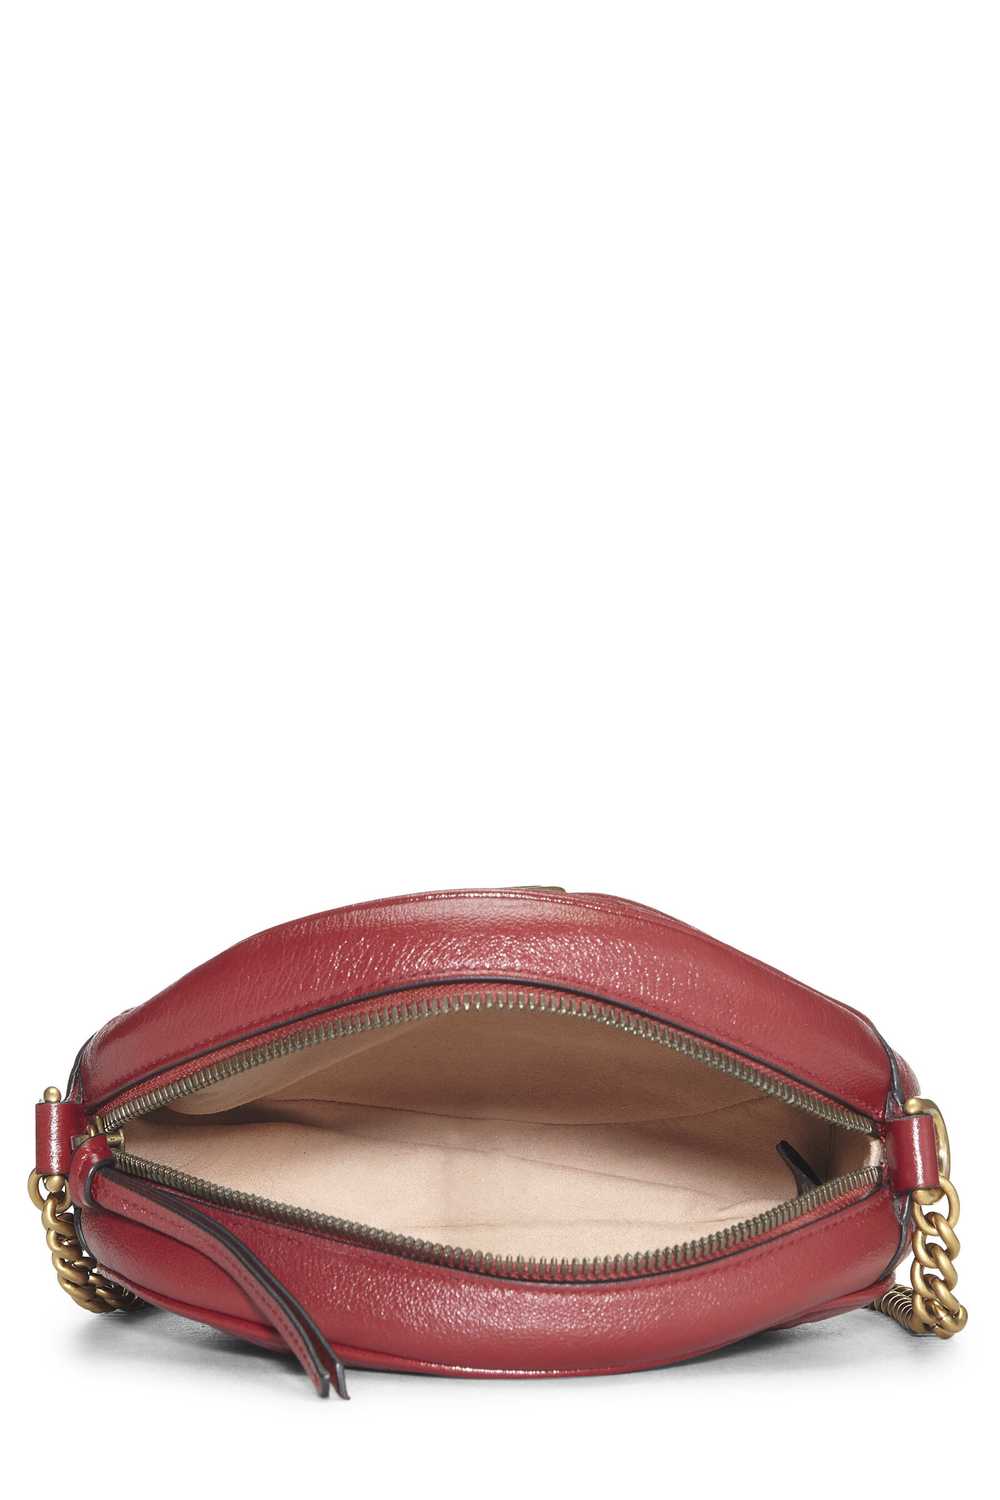 Red Leather GG Marmont Round Shoulder Bag Mini - image 6